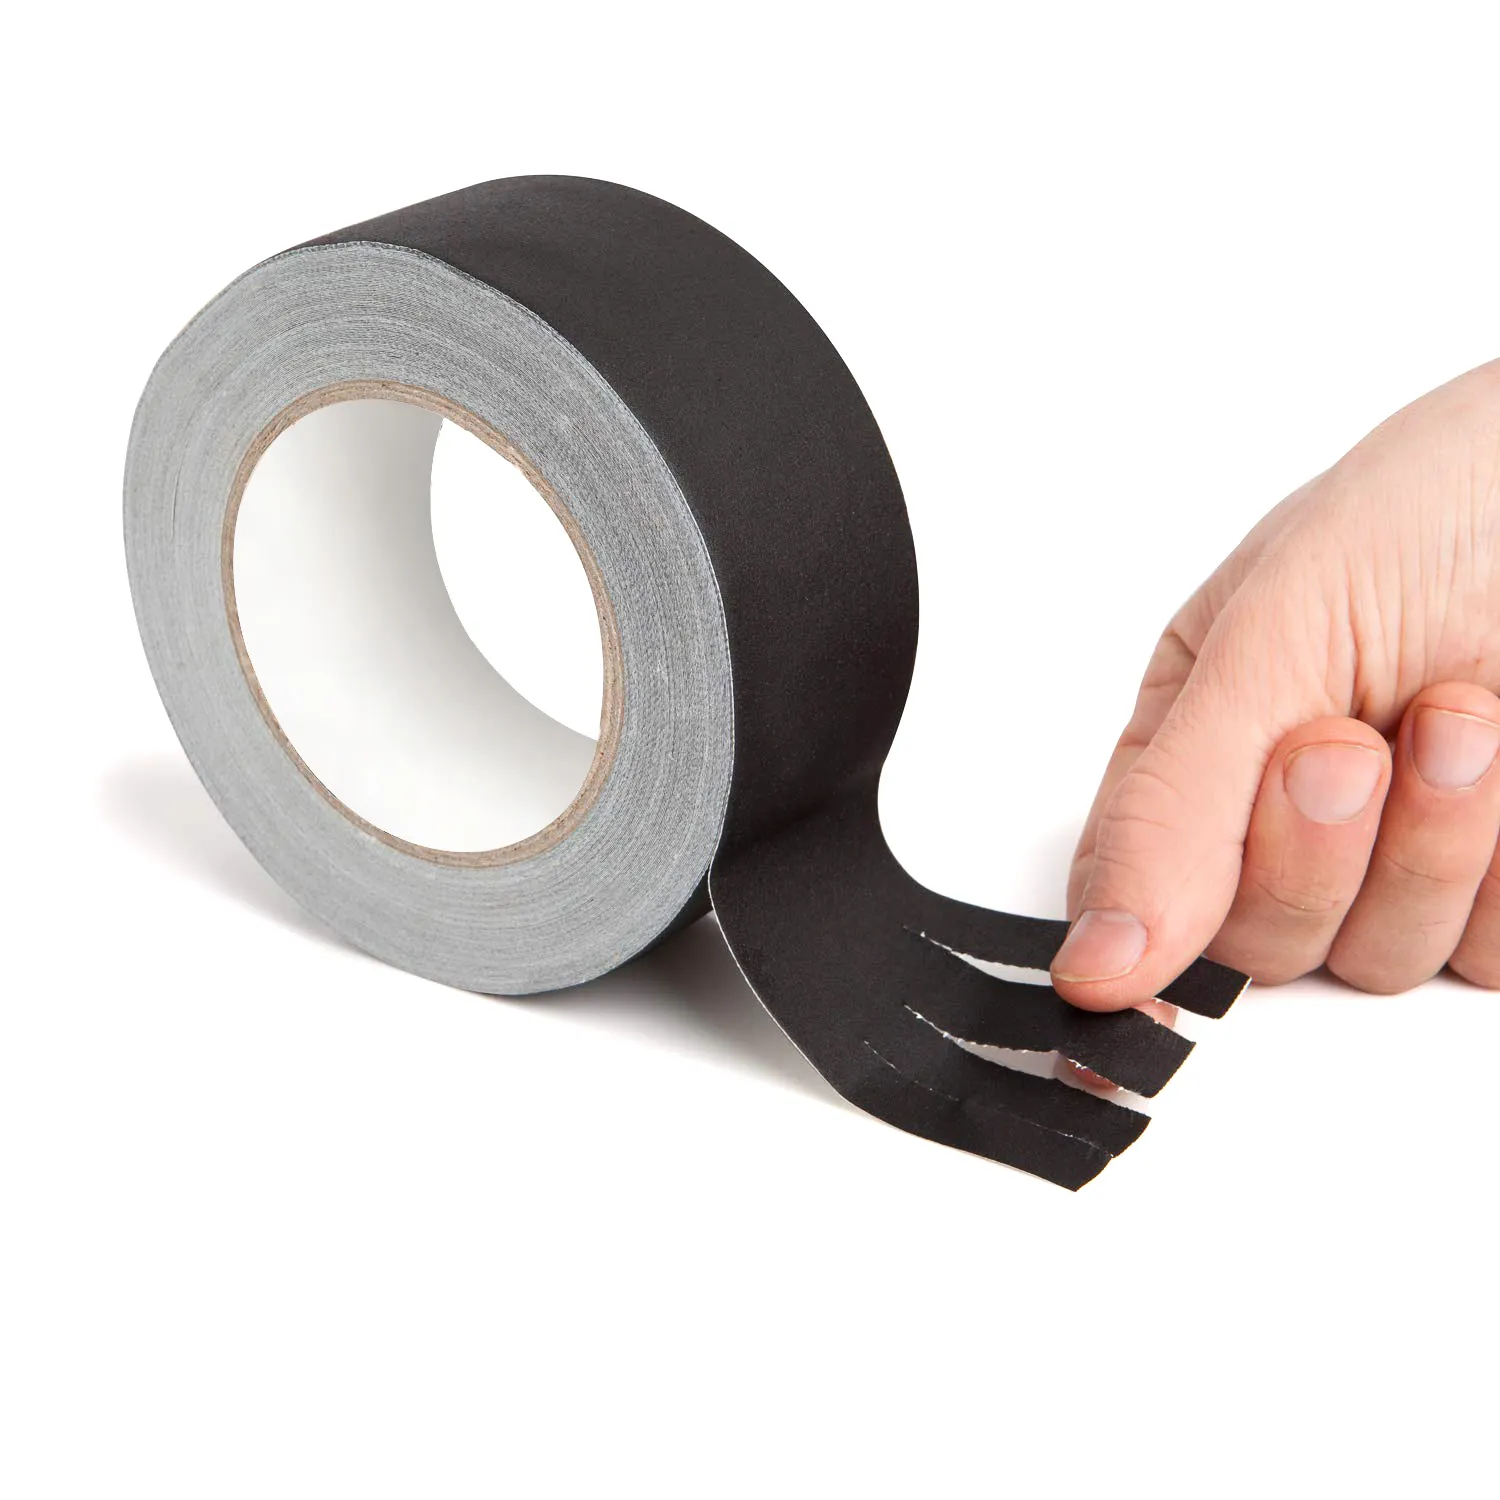 New Product Rubber Gaffer Duct Black Book Binding Adhesive Cloth Tape